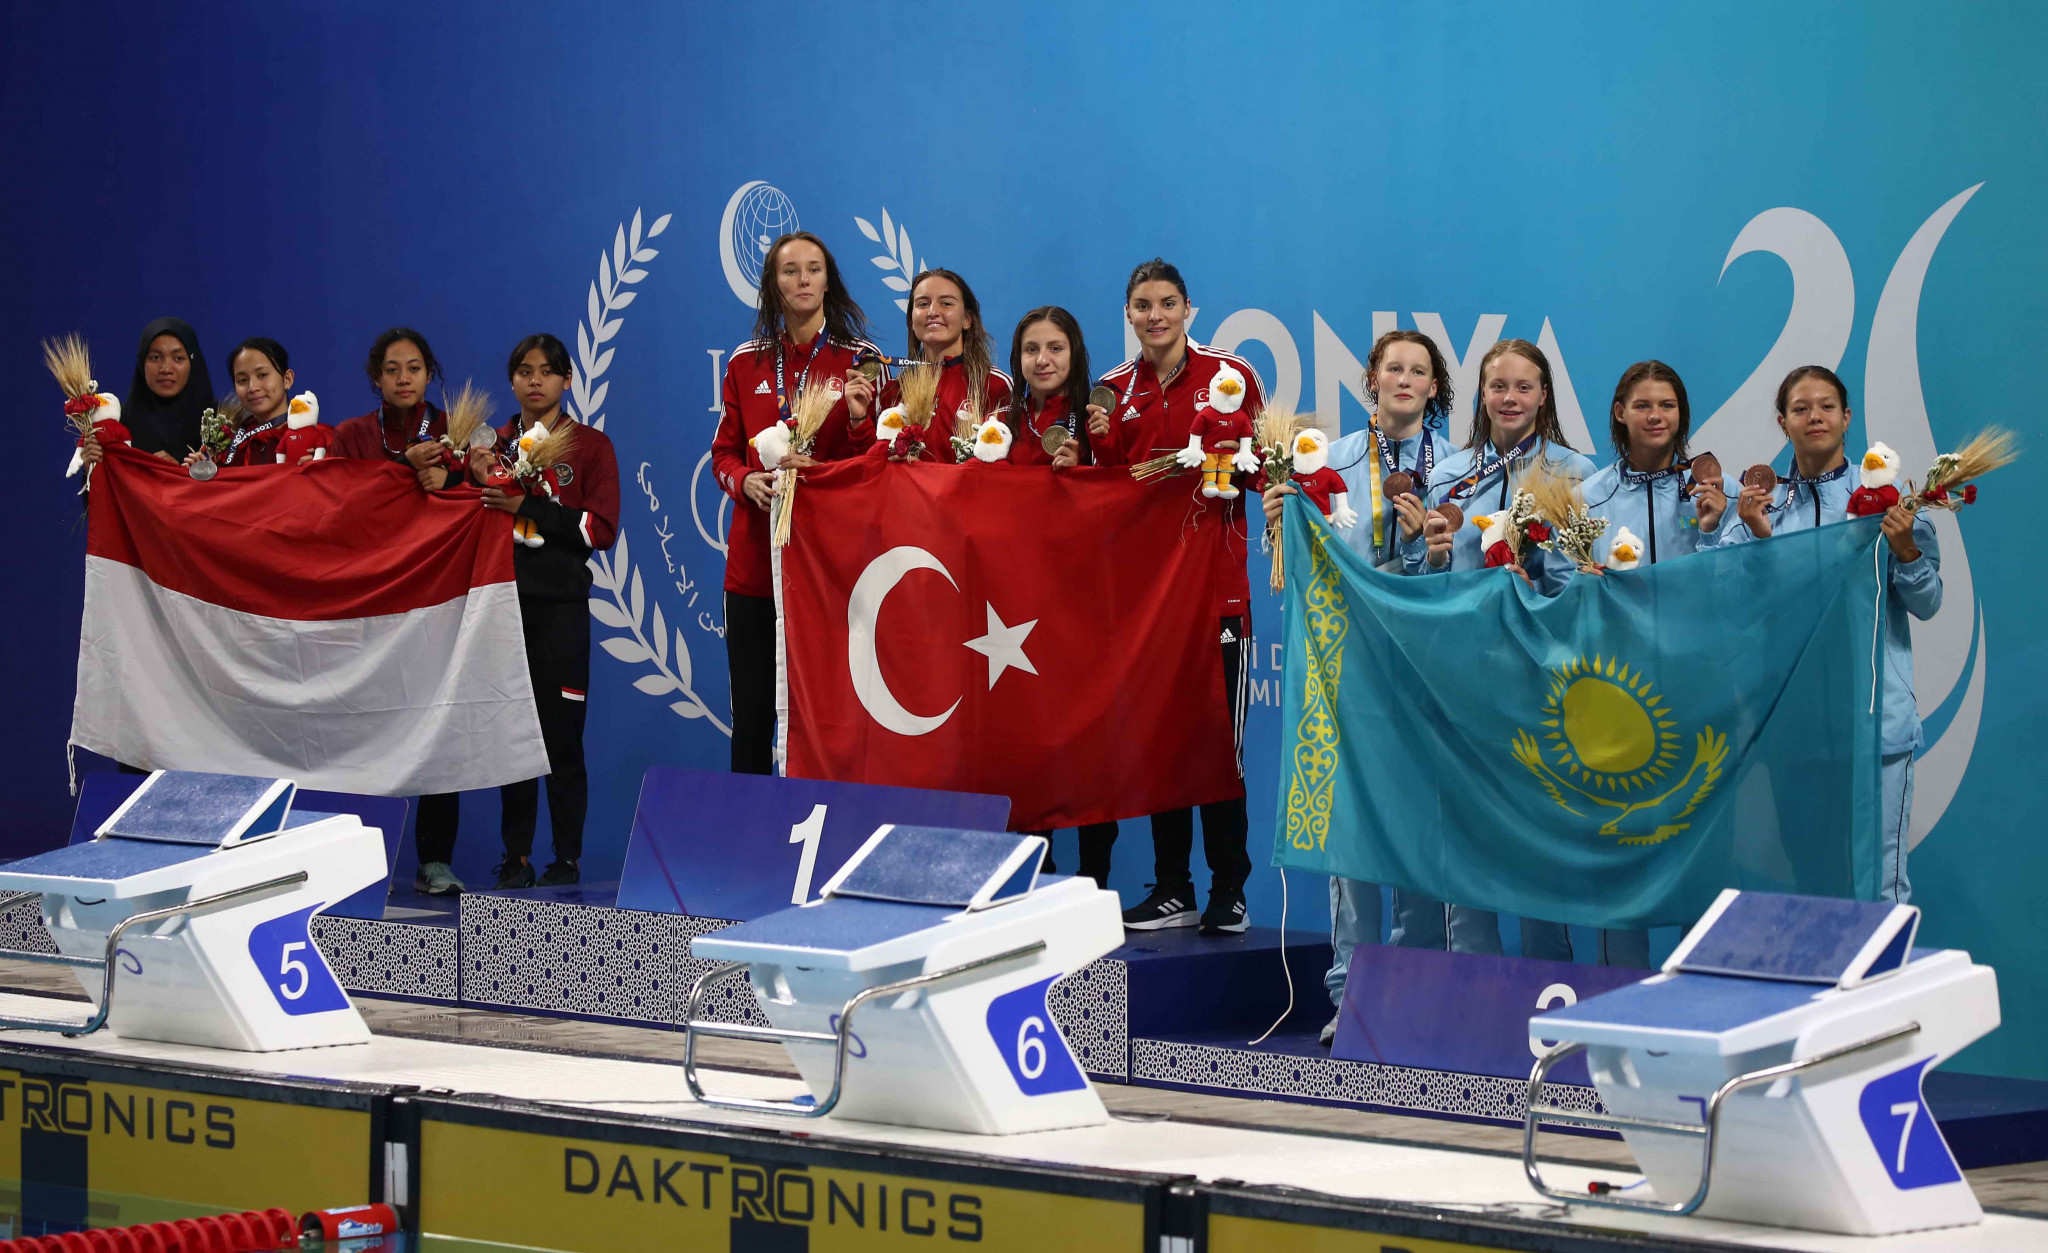 Turkey powered to victory in the women's 4x100m freestyle relay final at the Konya Olympic Swimming Pool ©Konya 2021